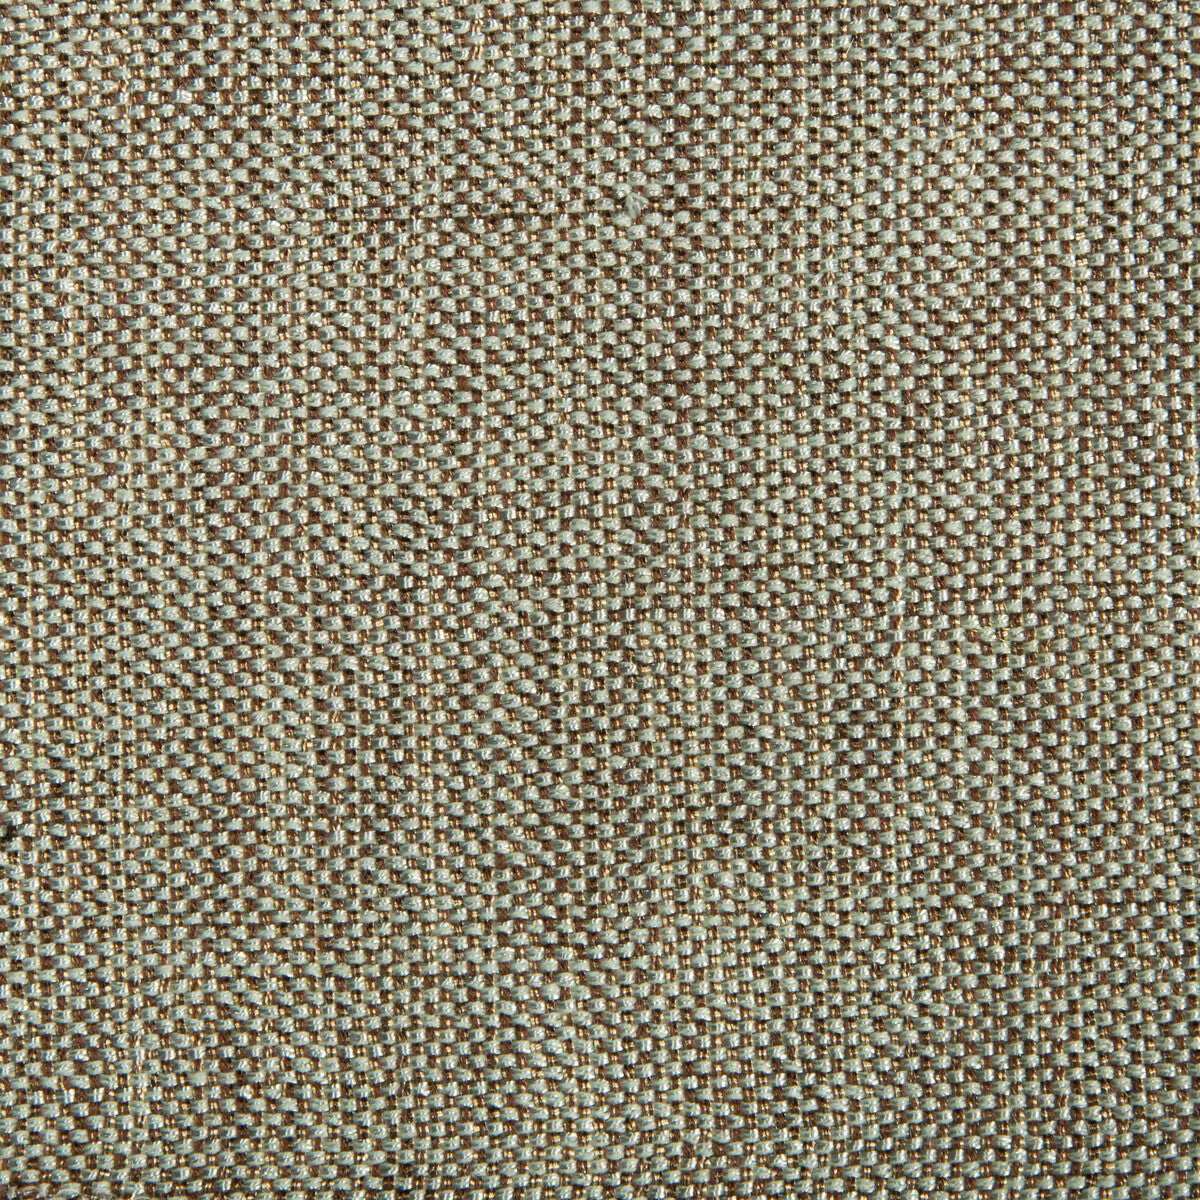 Kravet Contract fabric in 4458-615 color - pattern 4458.615.0 - by Kravet Contract